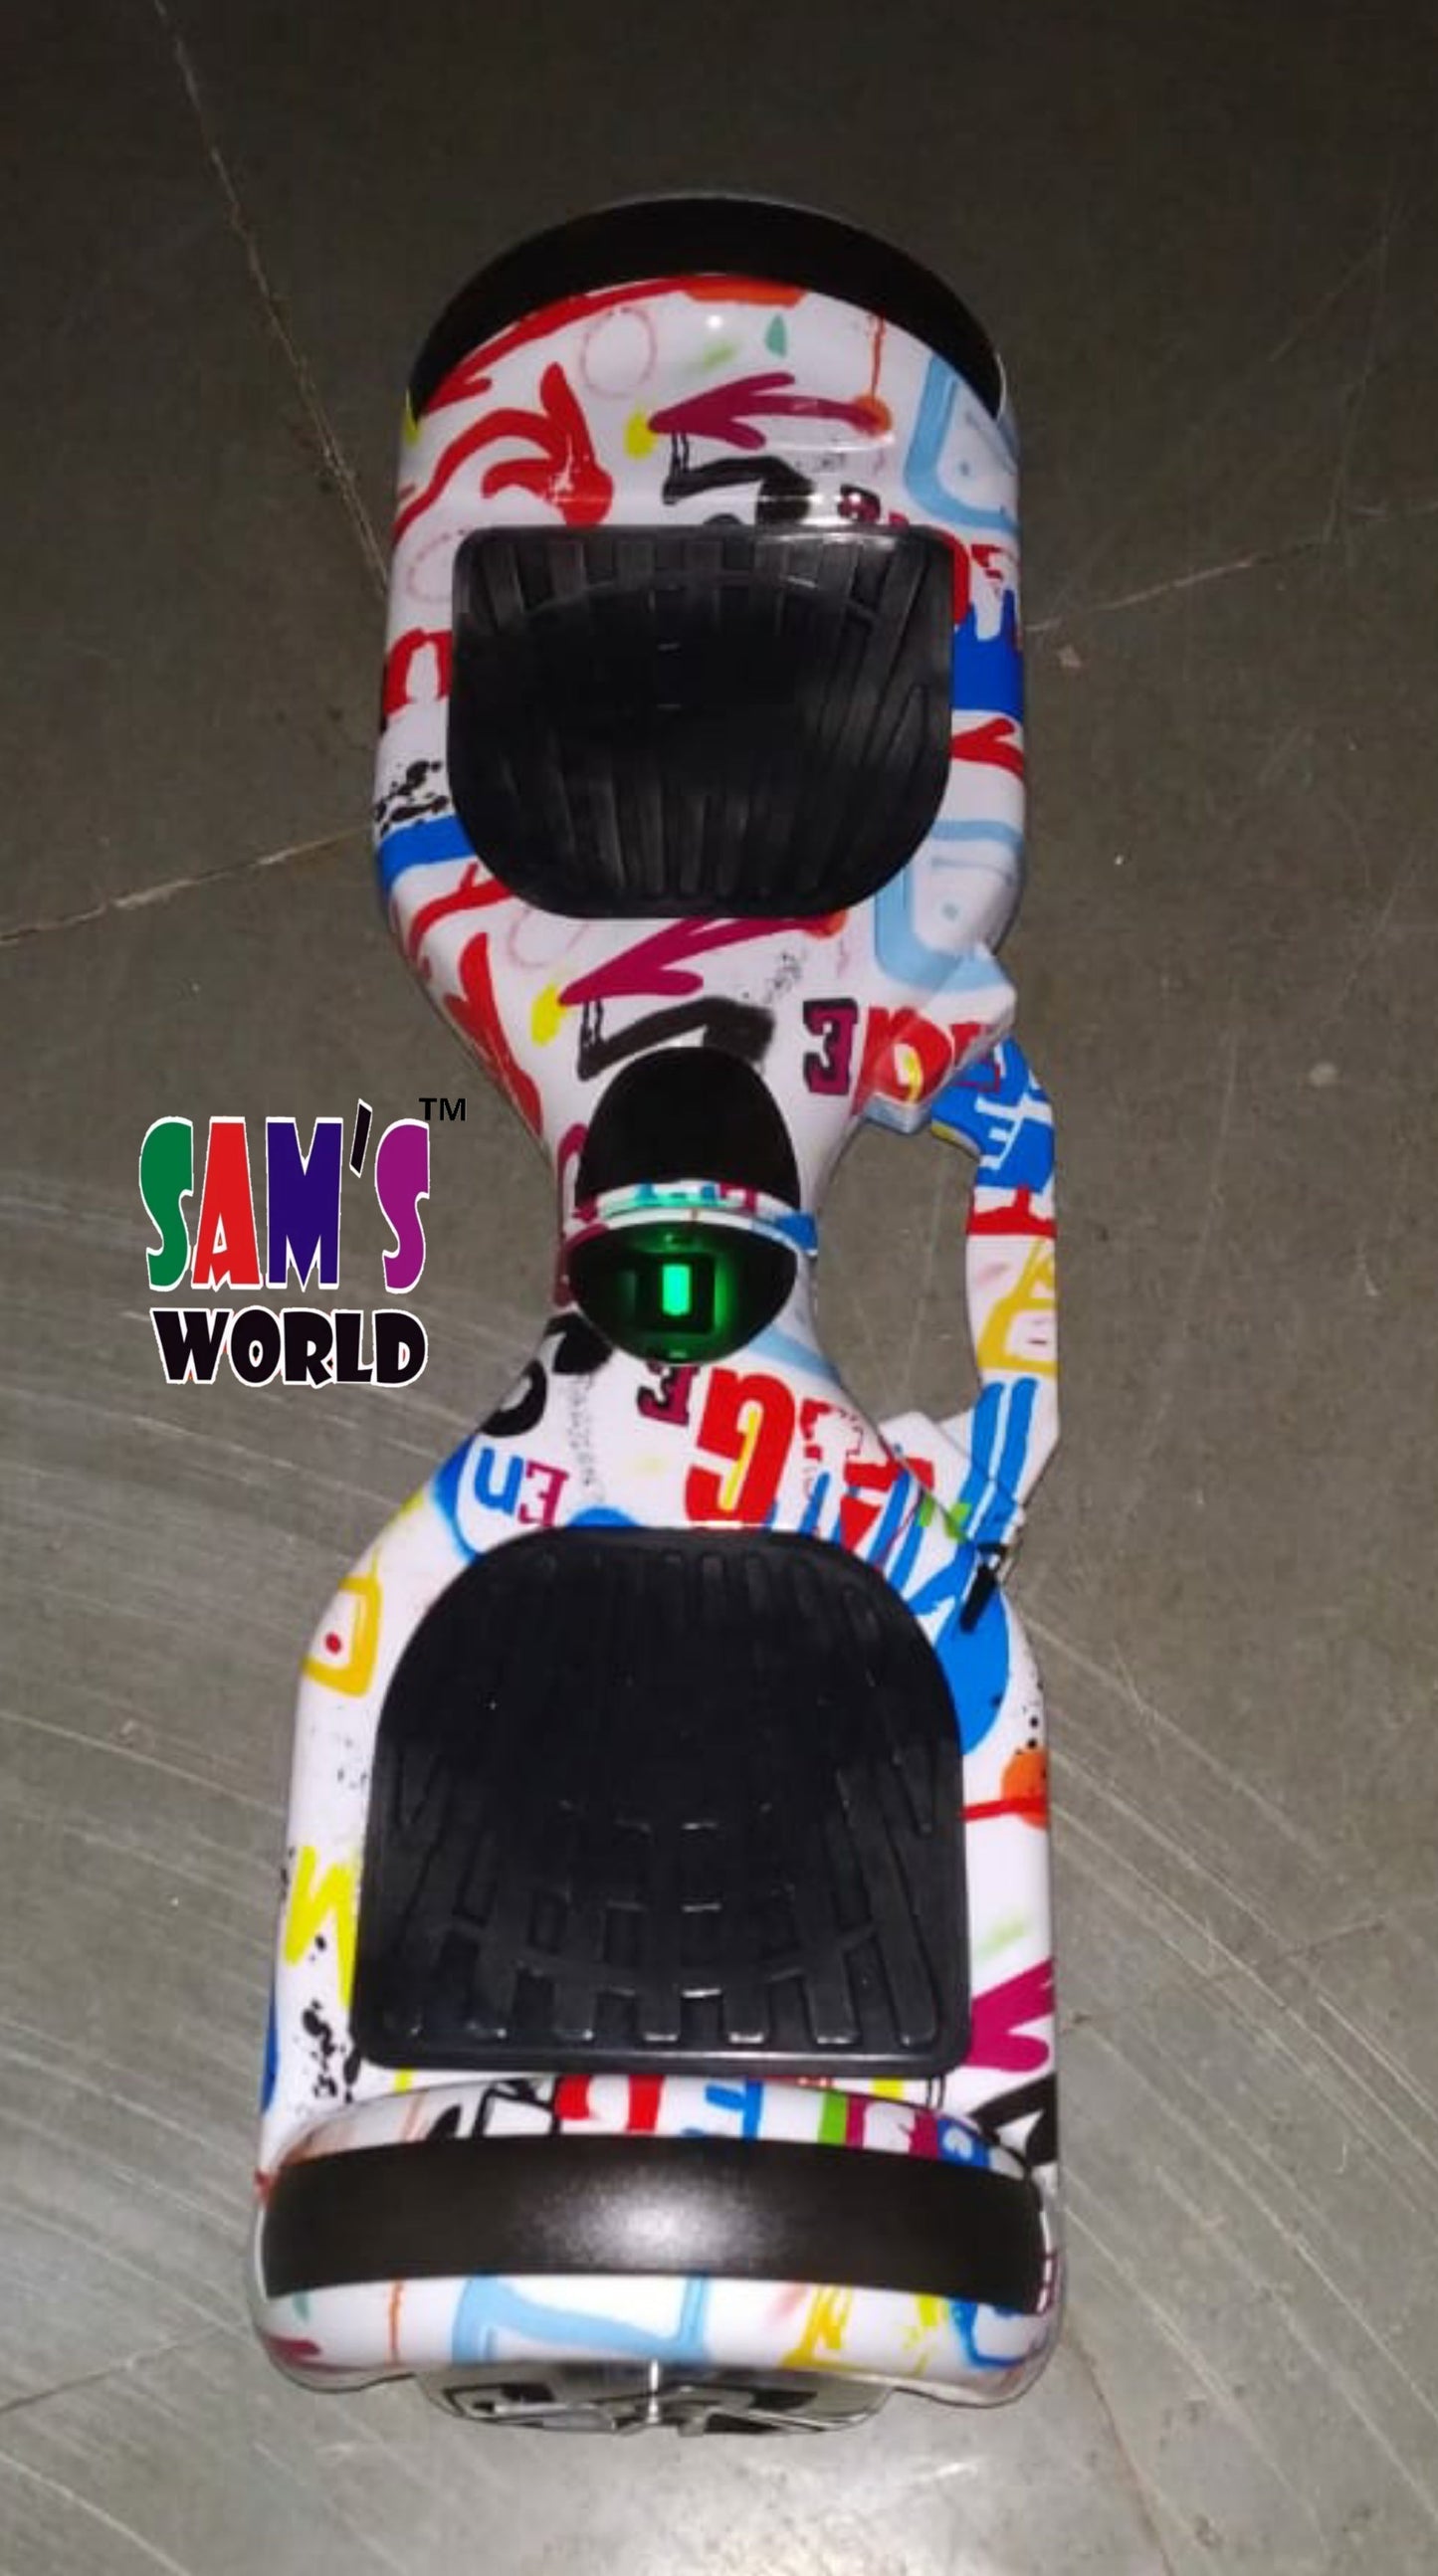 Buy Children's Balance wheel | Hower-Board Bluetooth with Light | sams world - sams toy world shops in Ahmedabad - call on 9664998614 - best kids stores in Gujarat - Near me - discounted prices